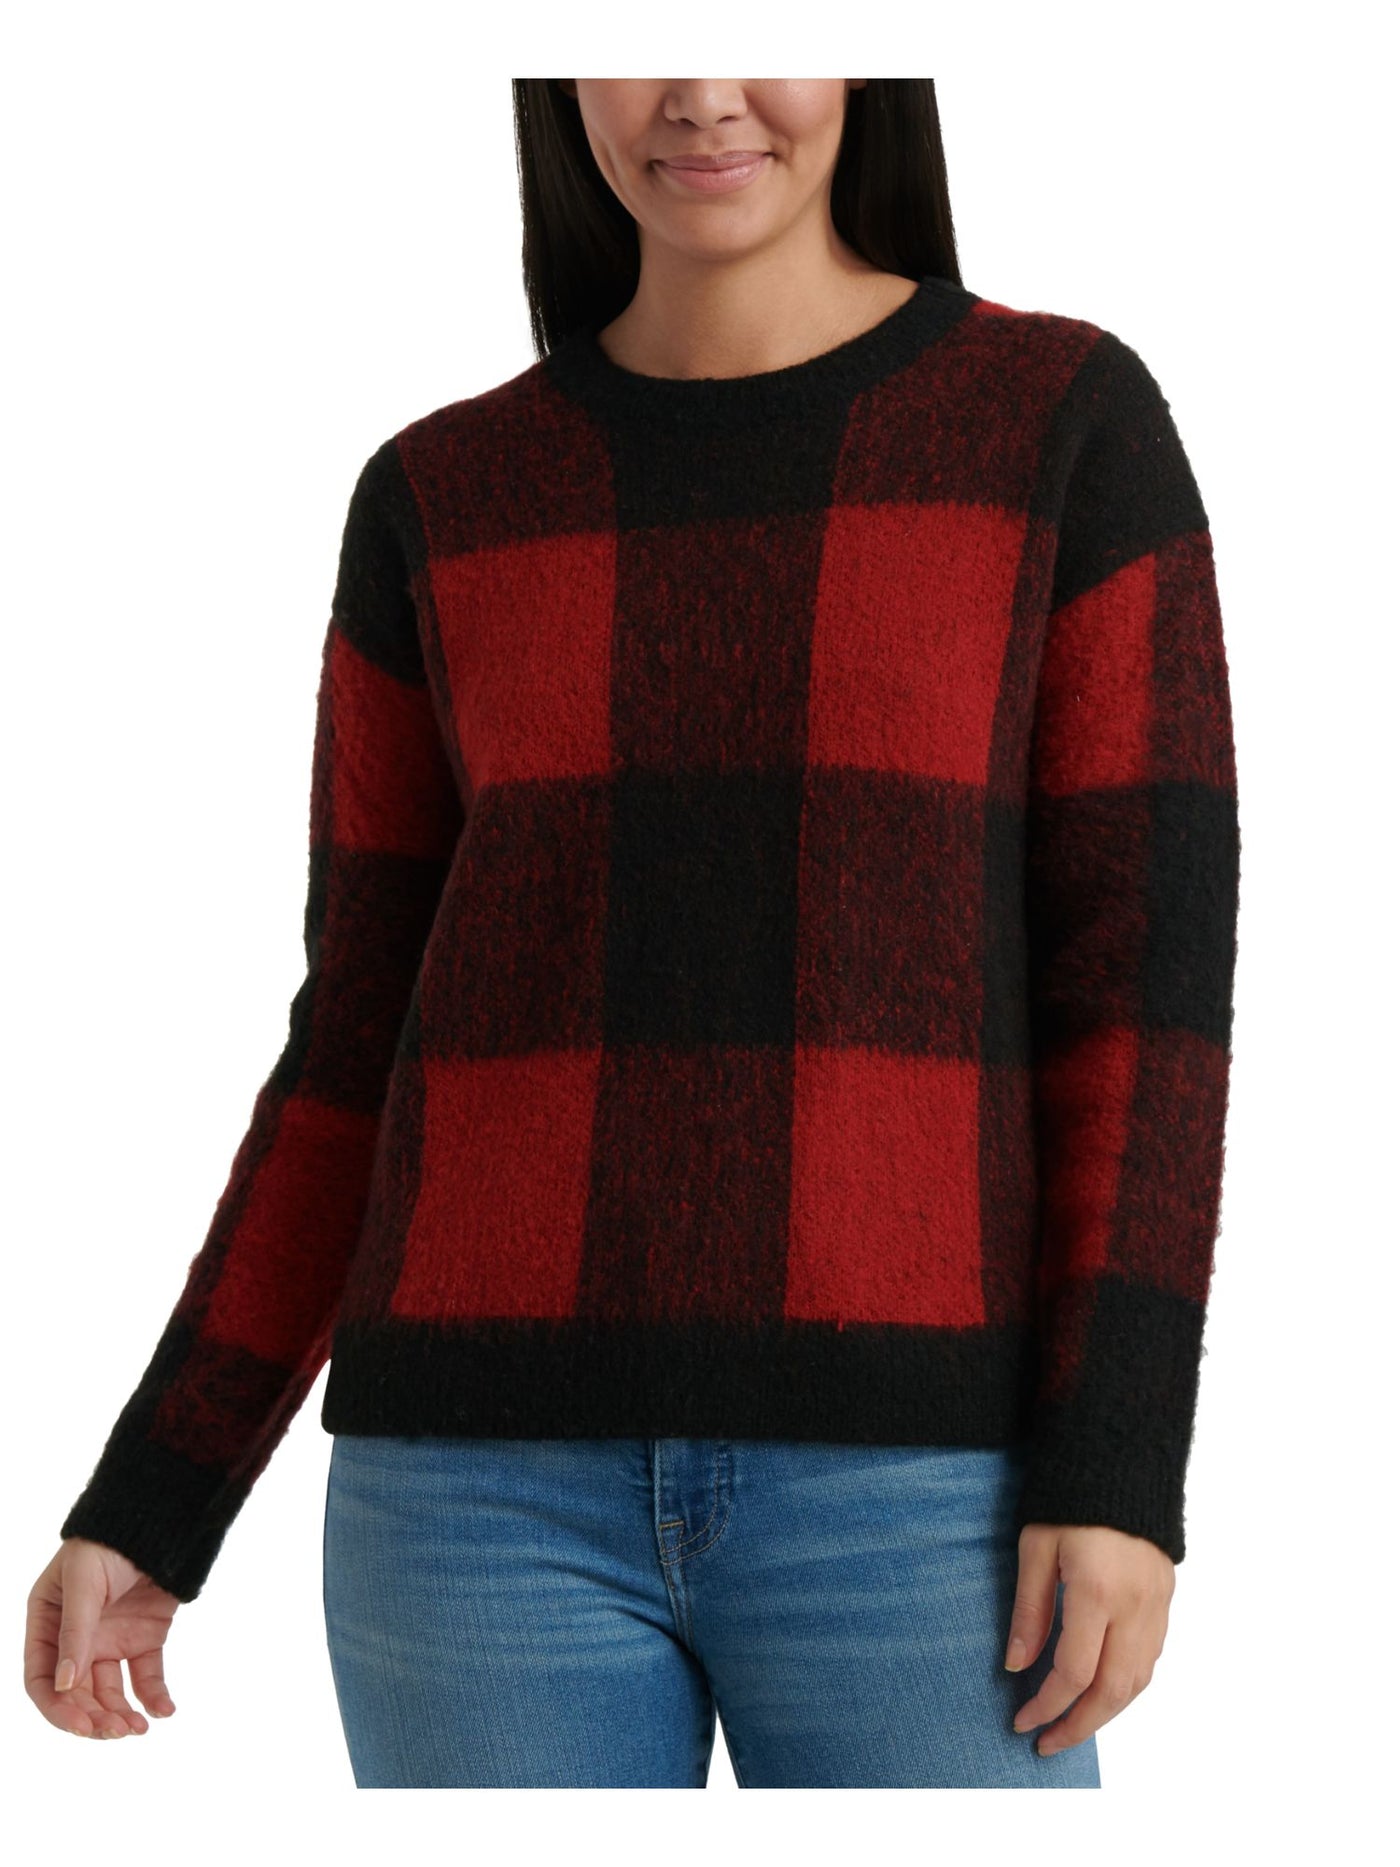 LUCKY BRAND Womens Red Plaid Long Sleeve Jewel Neck Top L